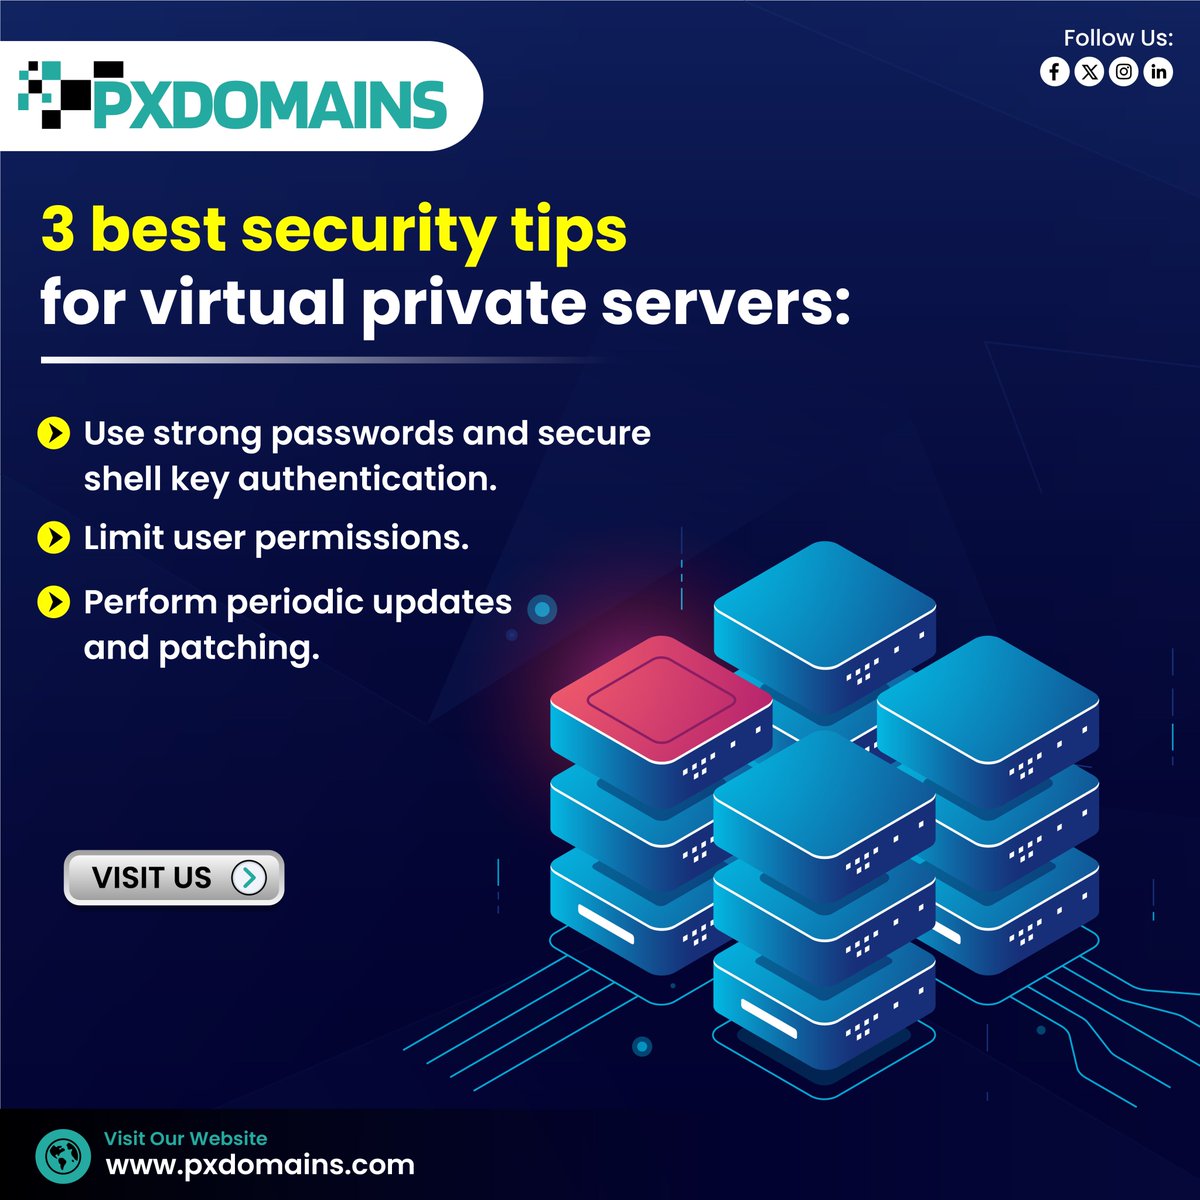 #VPS #technology improves security through isolation, dedicated resources and customization. With these tips, you can safeguard your #servers from #malicious attacks and #databreaches.
#vpshosting #webhosting #hosting #vps #sharedhosting #cloudhosting #website #webhostingcompany